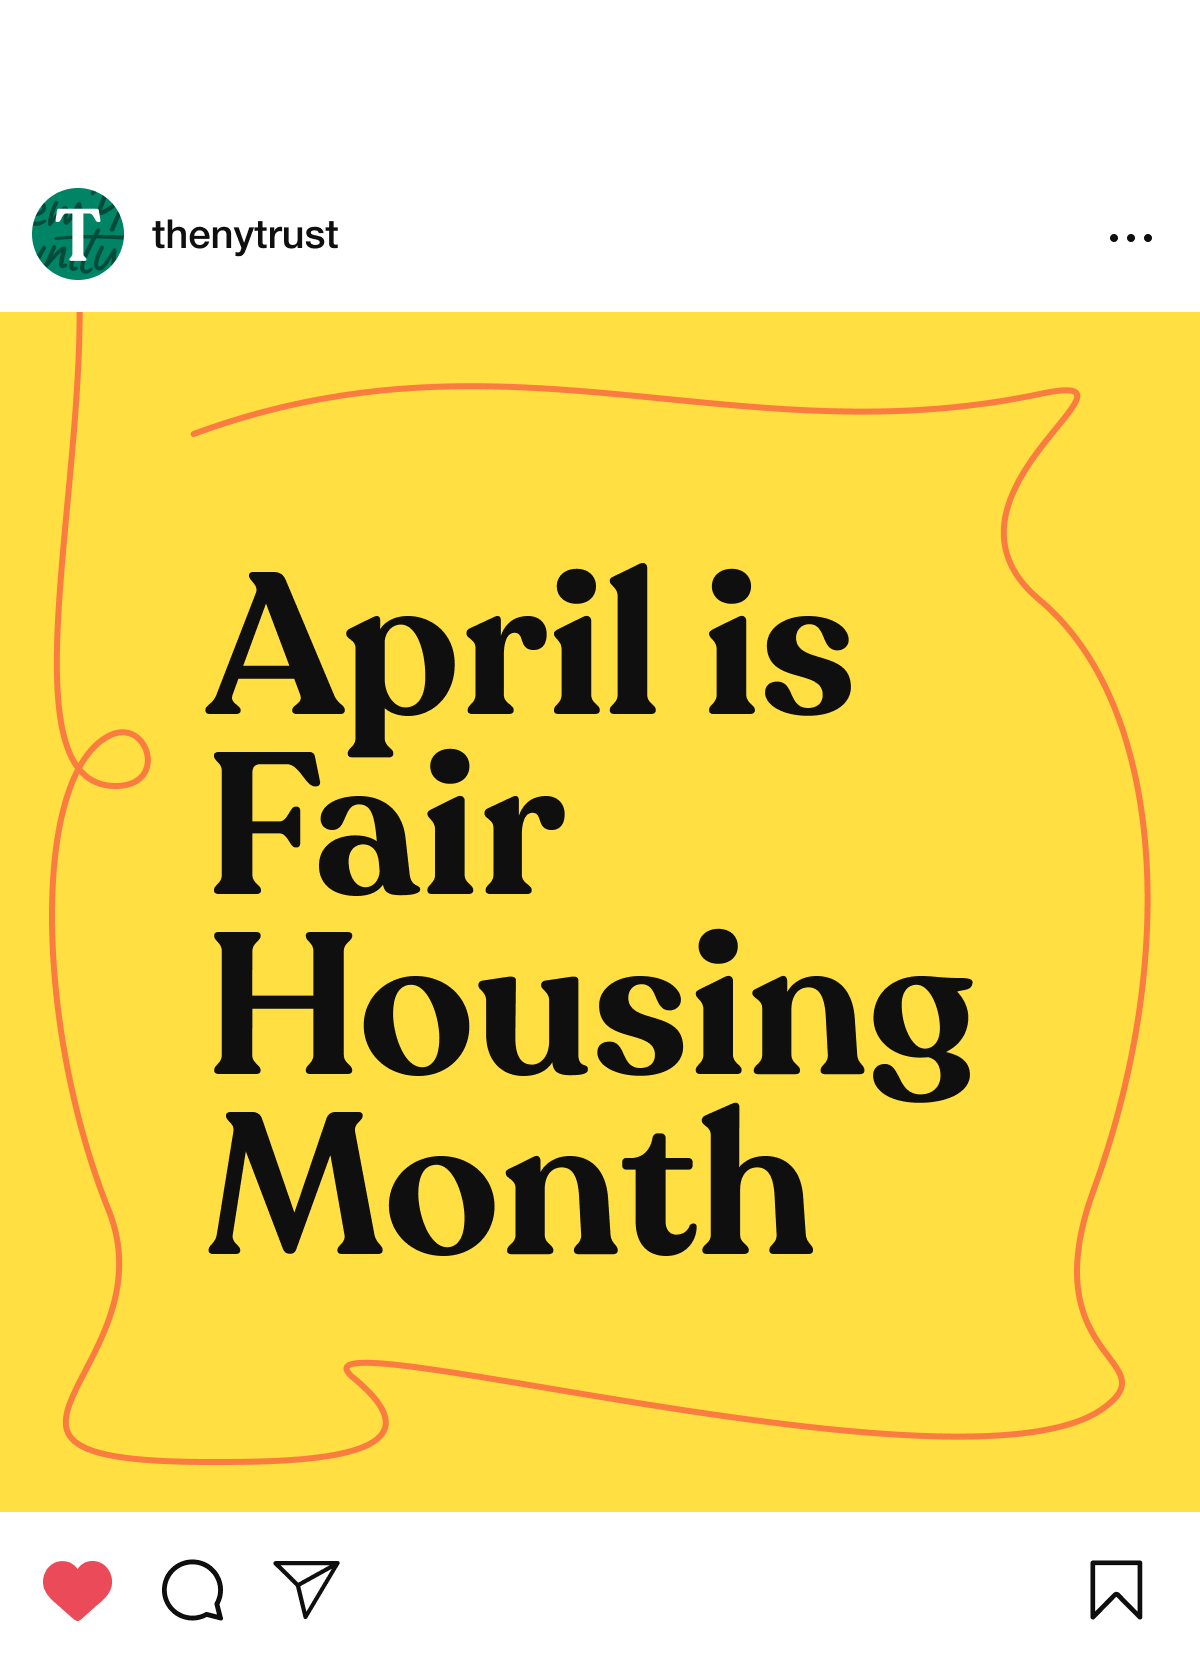 Instagram post by thenytrust with a yellow background and red outline. The text reads "April is Fair Housing Month" in bold black letters.